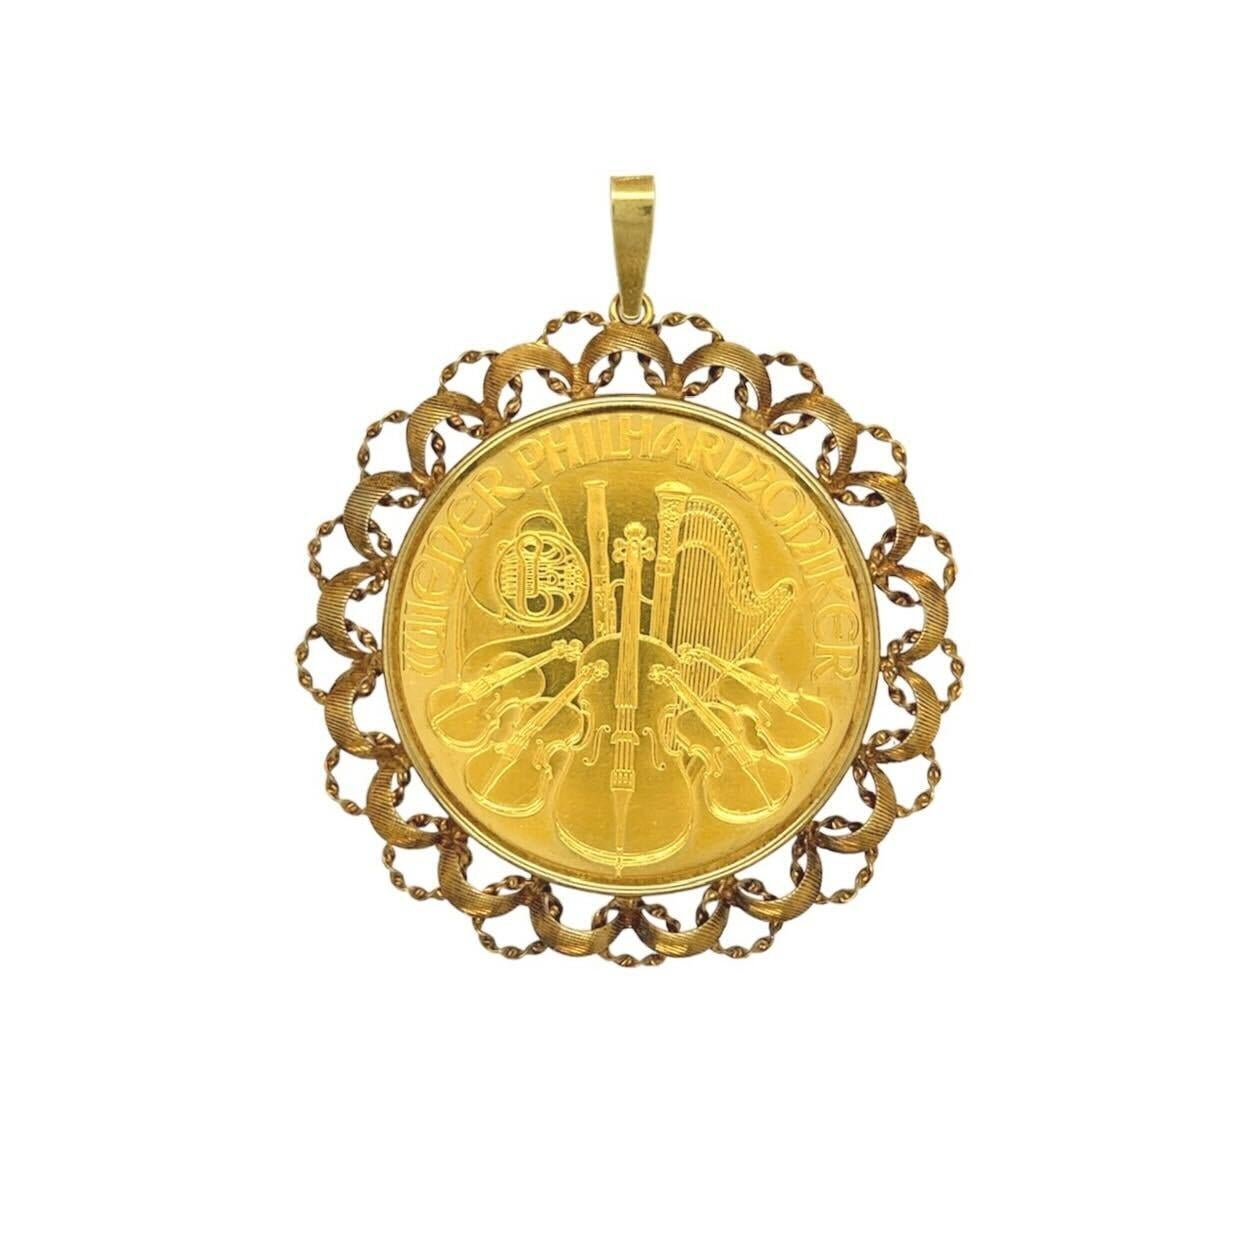 A 24 and 14 karat yellow gold pendant.  The pendant is formed of the 24 karat gold Austrian Vienna Philharmonic coin within a 14 karat gold scrolling ribbon motif frame.  The obverse of the coin depicts the pipe organ of the Vienna Philharmonic